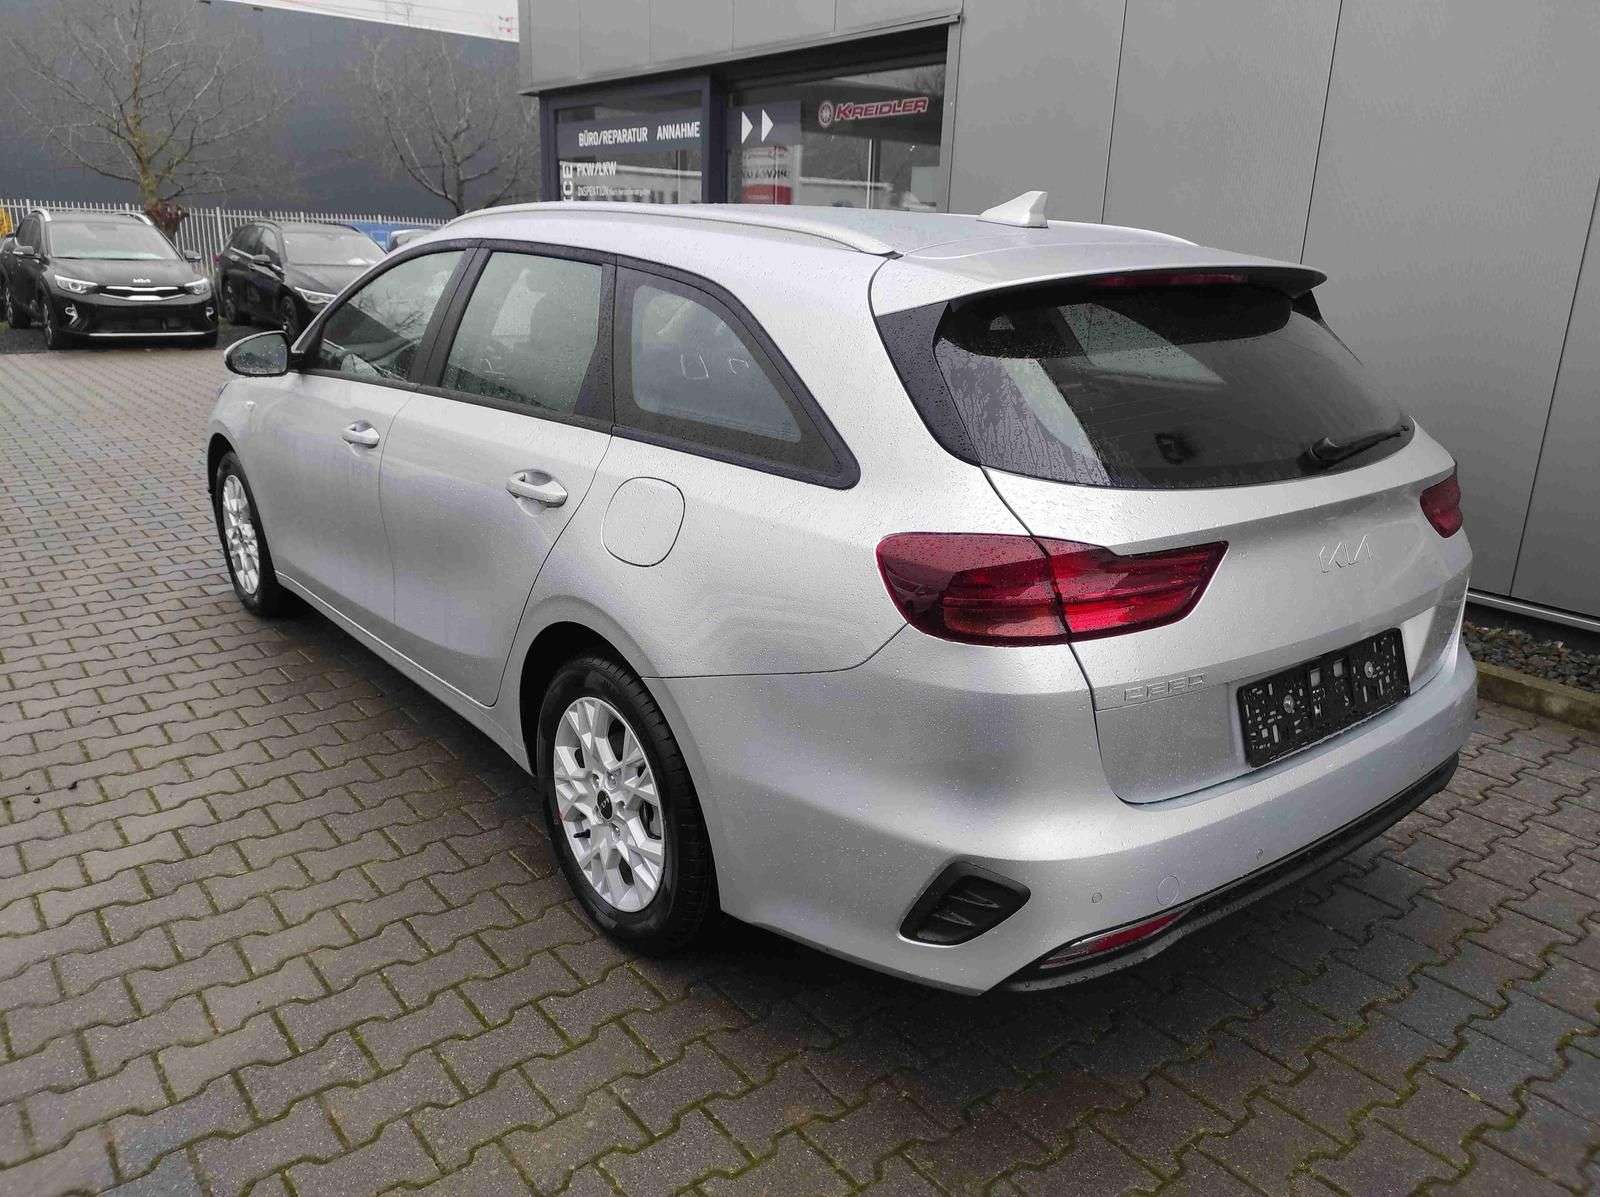 Kia Ceed SW / cee'd SW Station wagon in Silver used in Polch for € 21,990.-